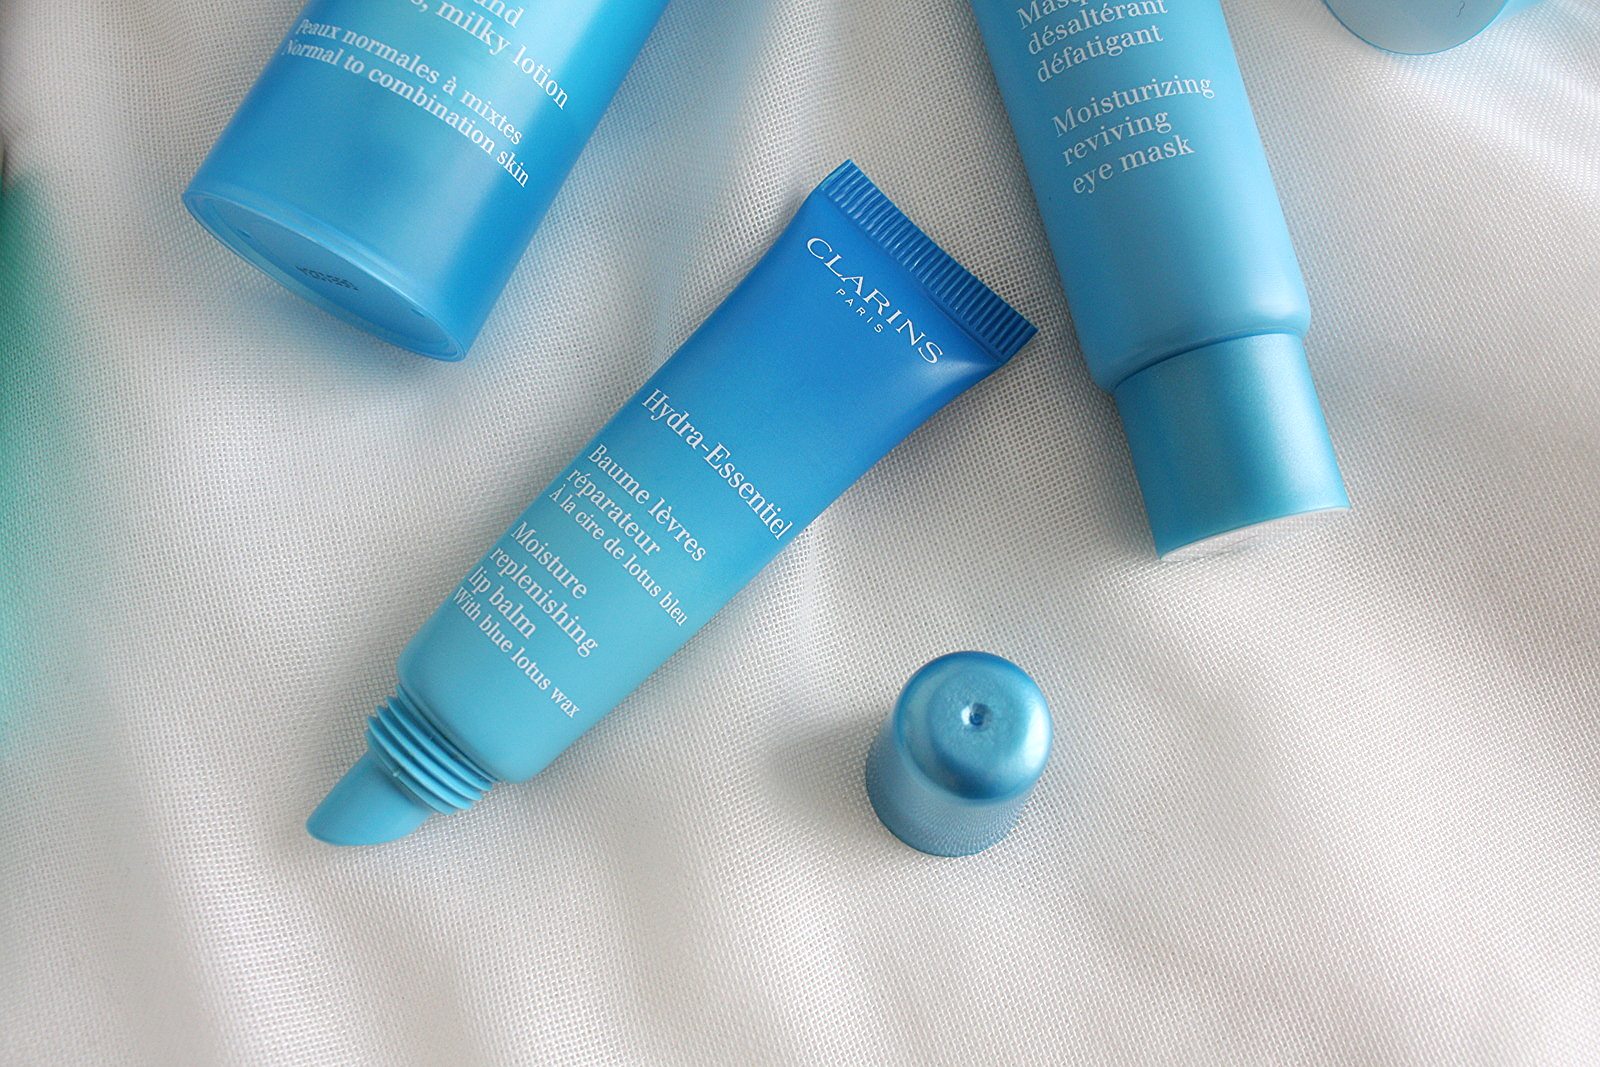 SKINCARE TESTING WITH CLARINS